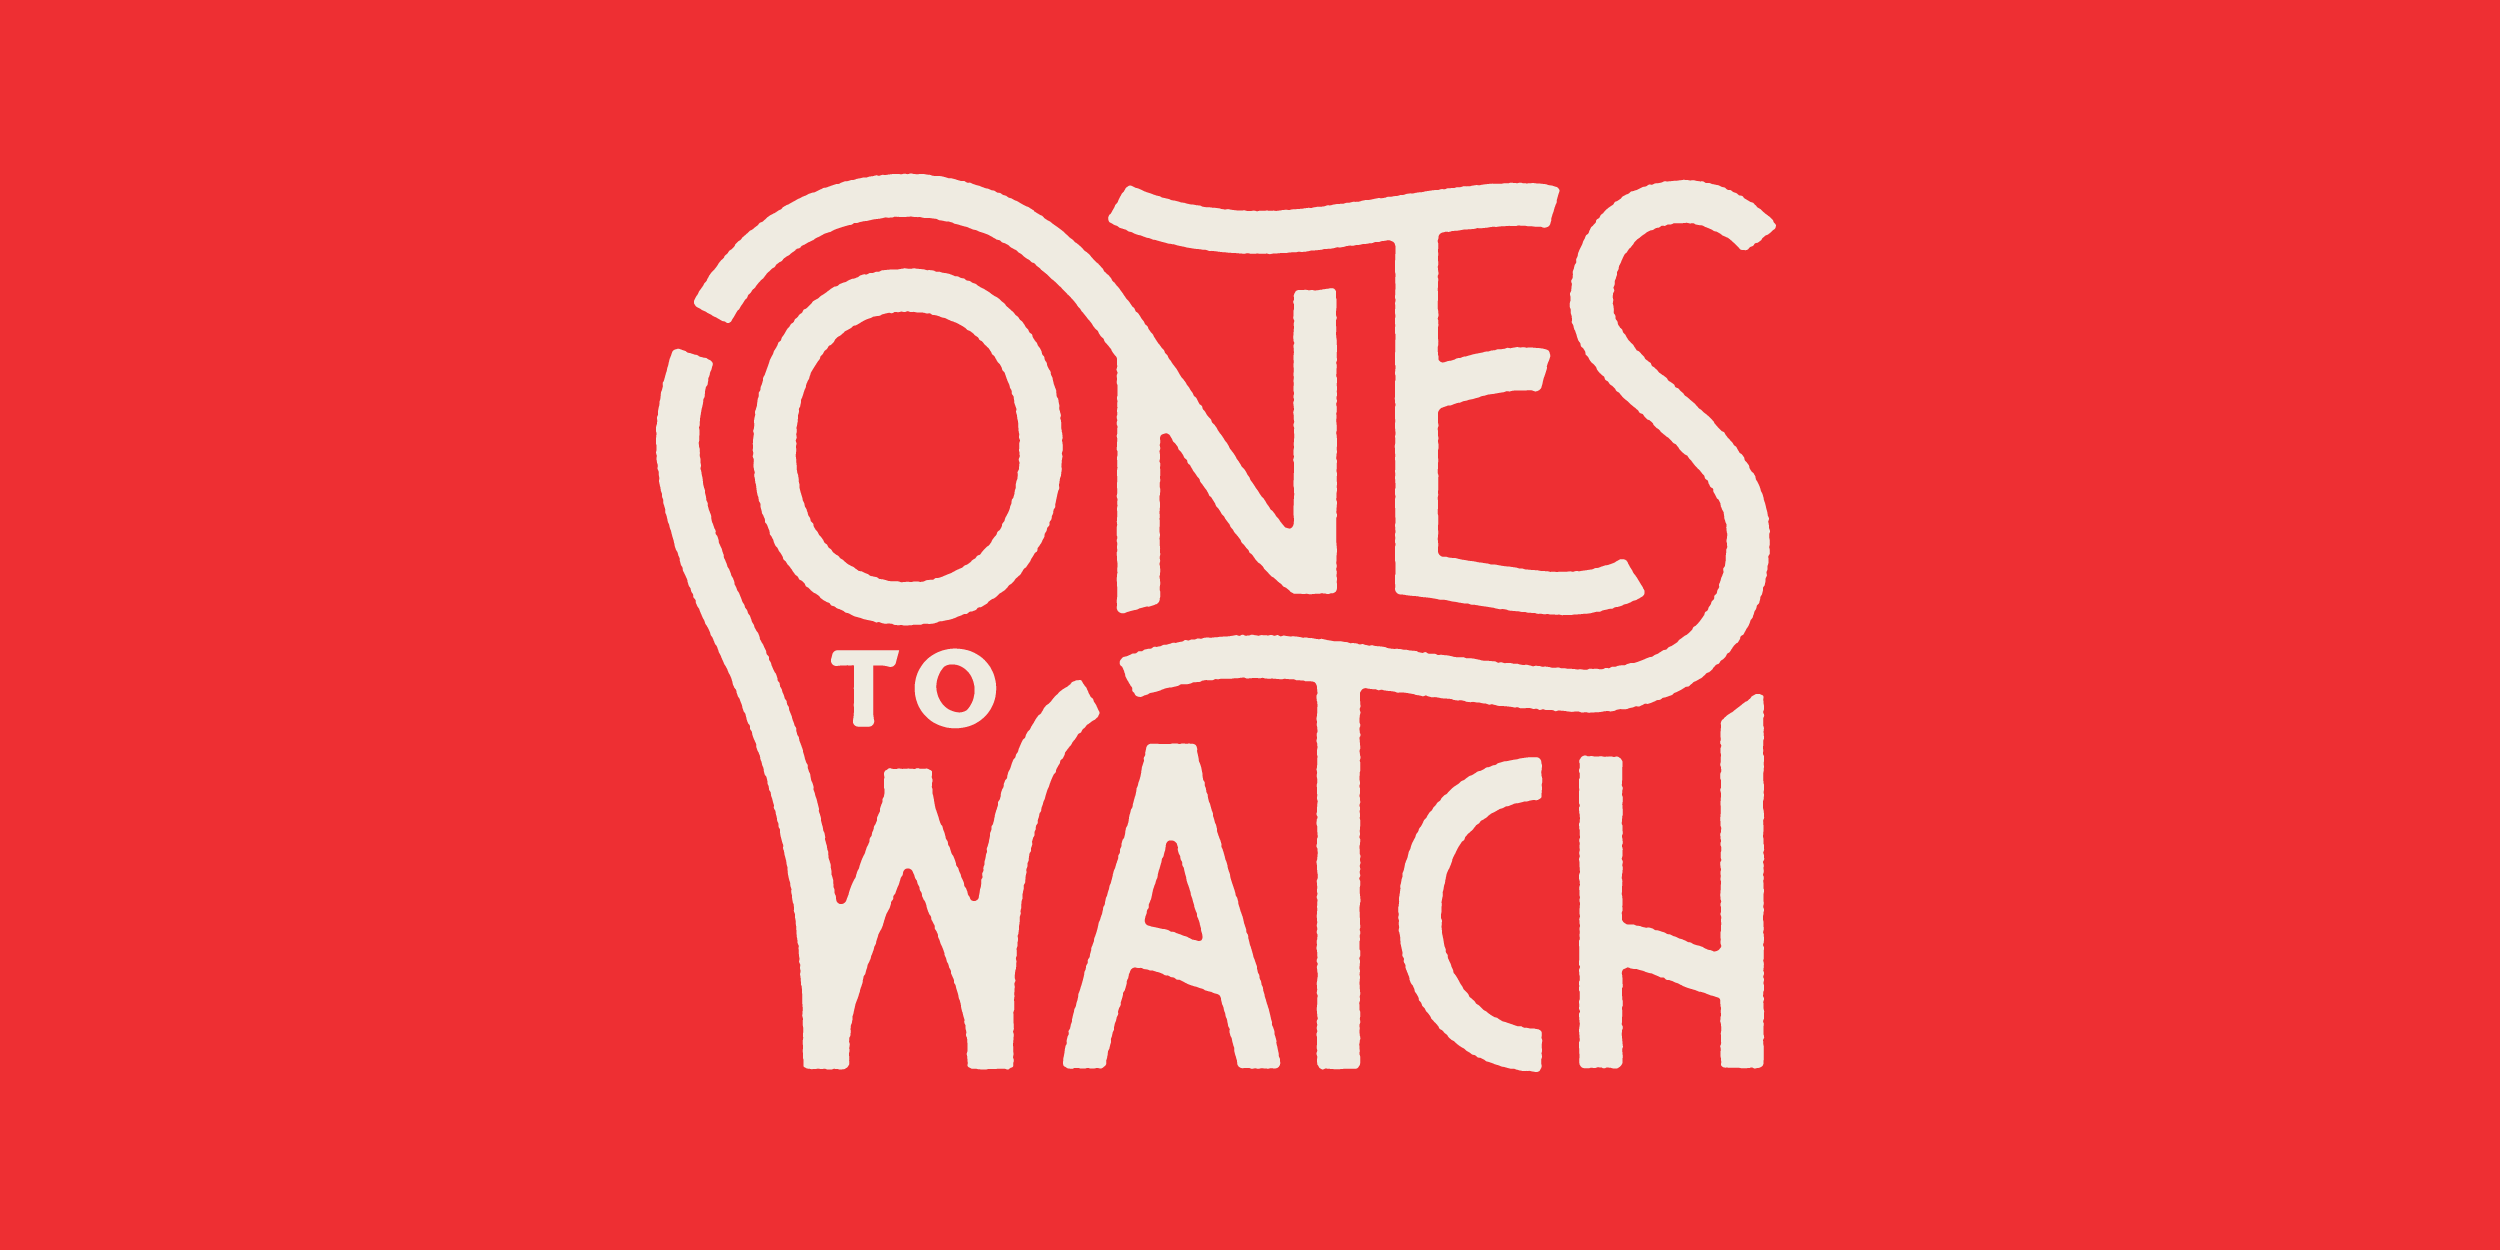 Ones to Watch custom lettering by Hoodzpah